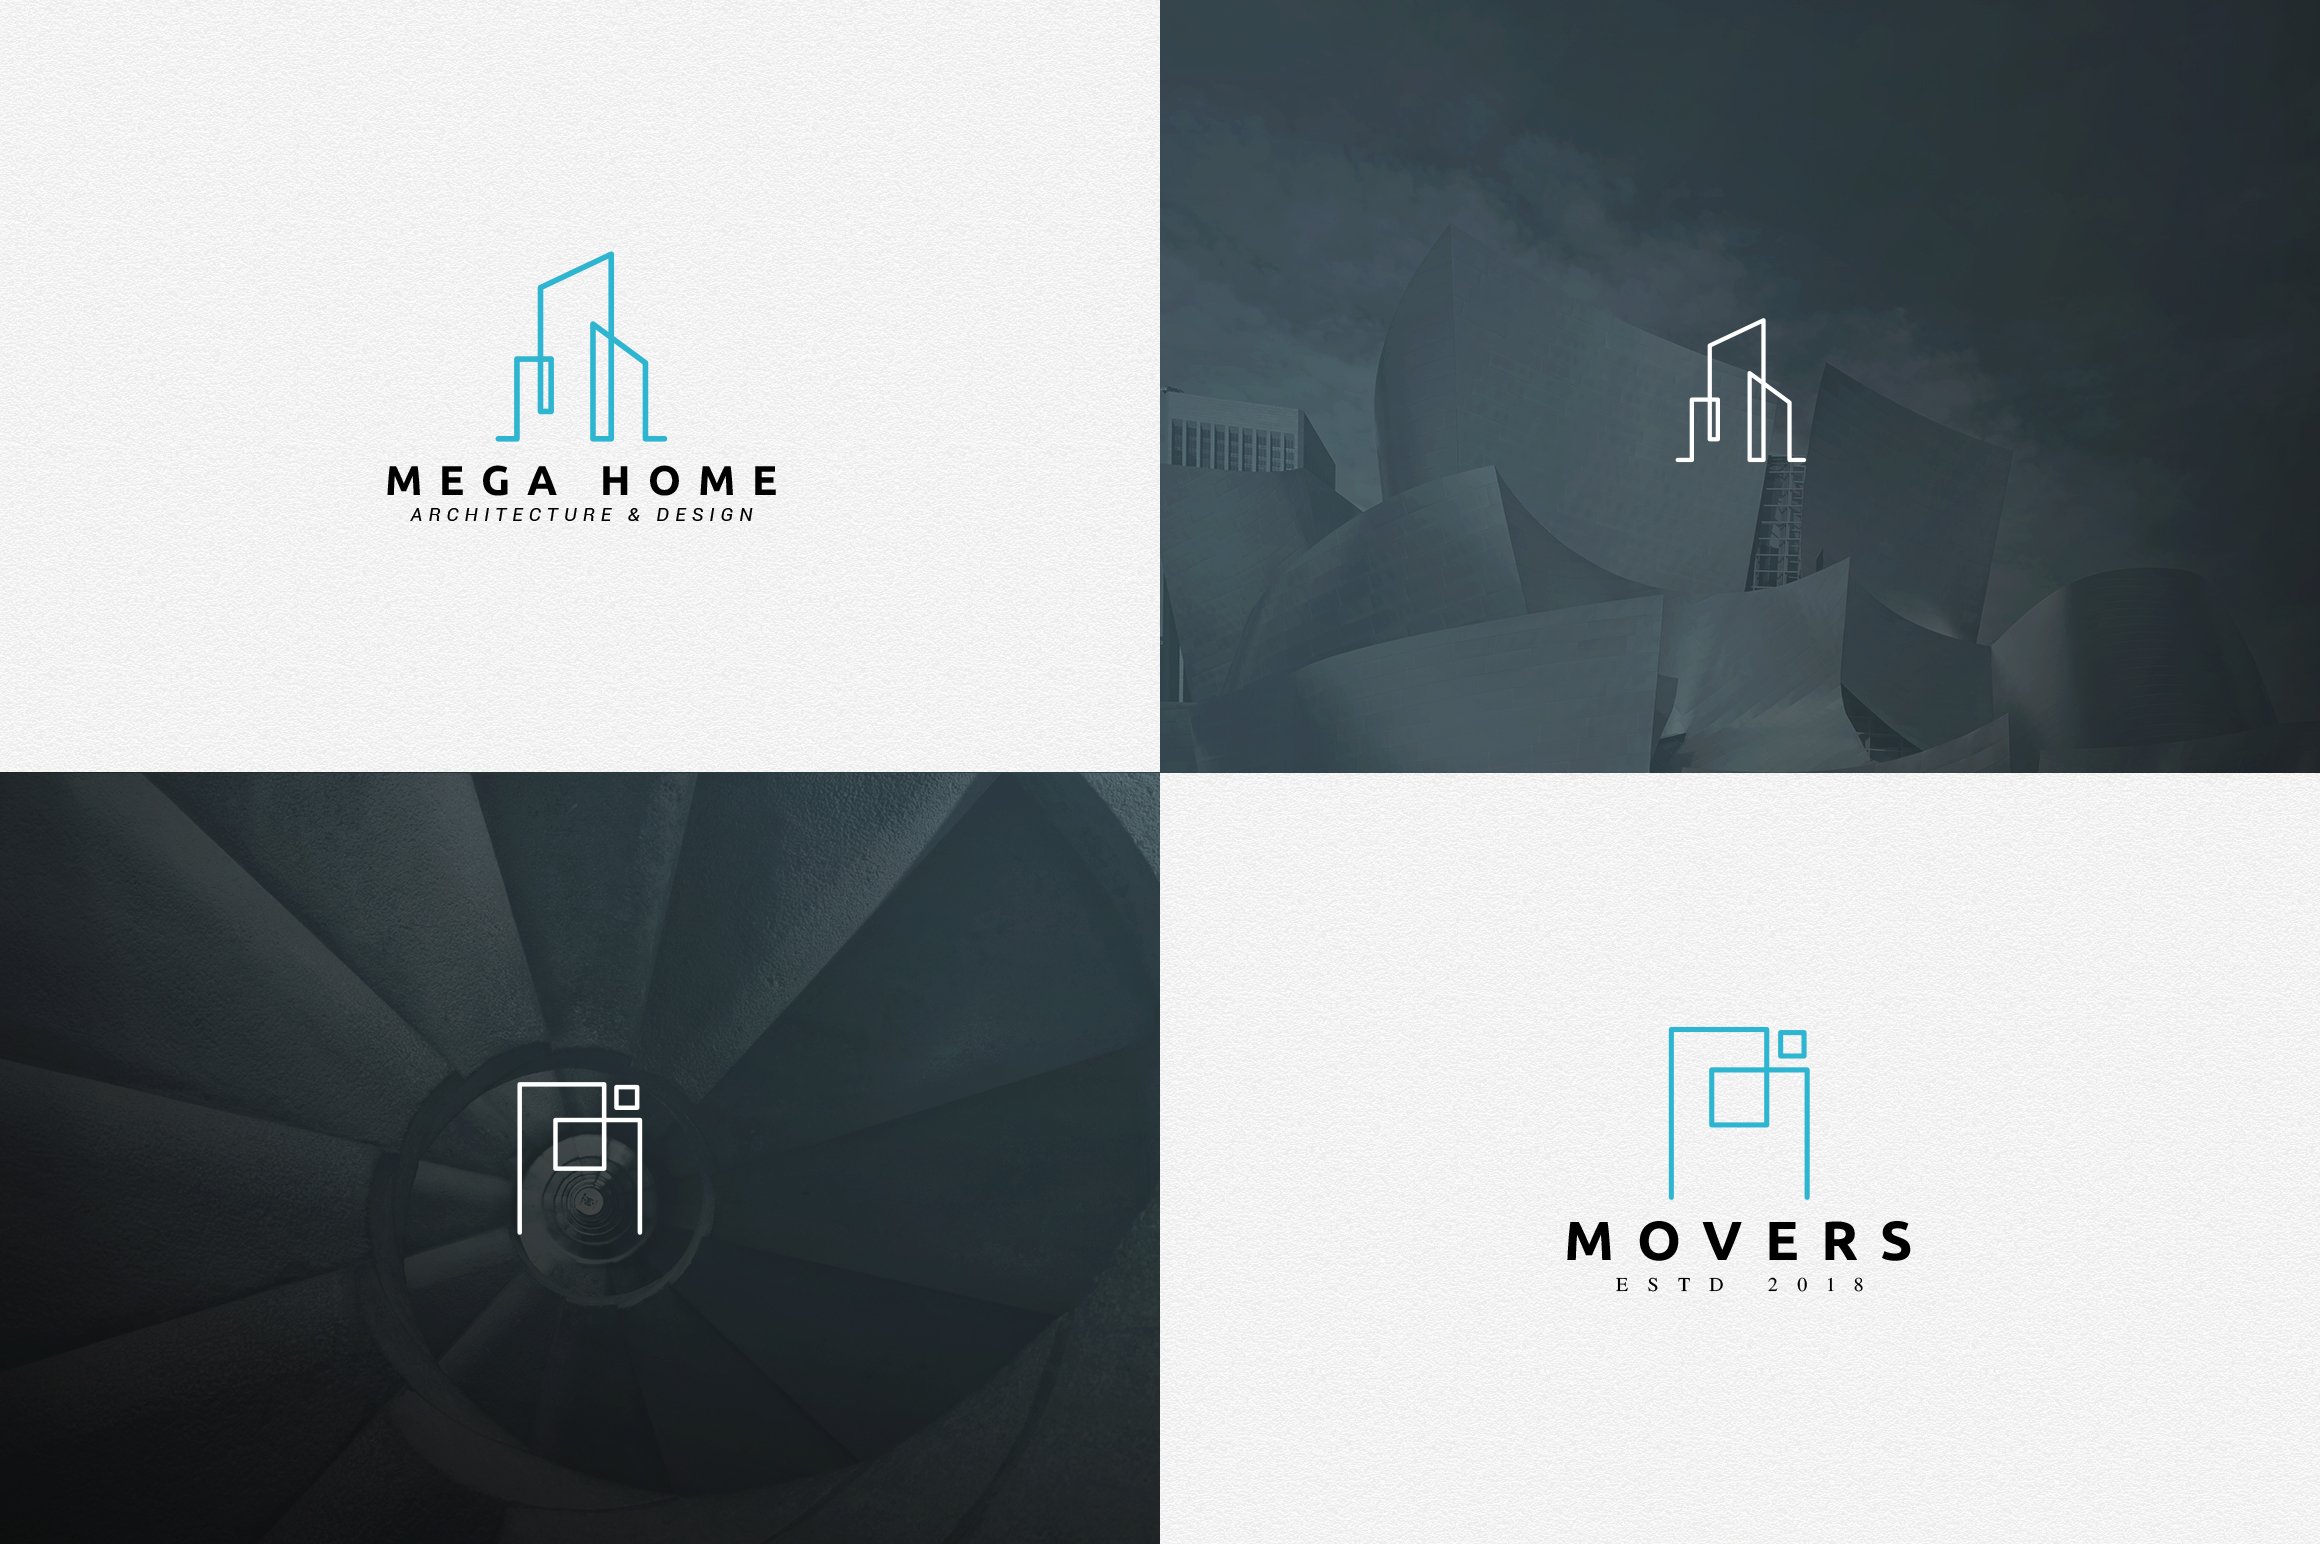 Interesting logos for architecture projects.